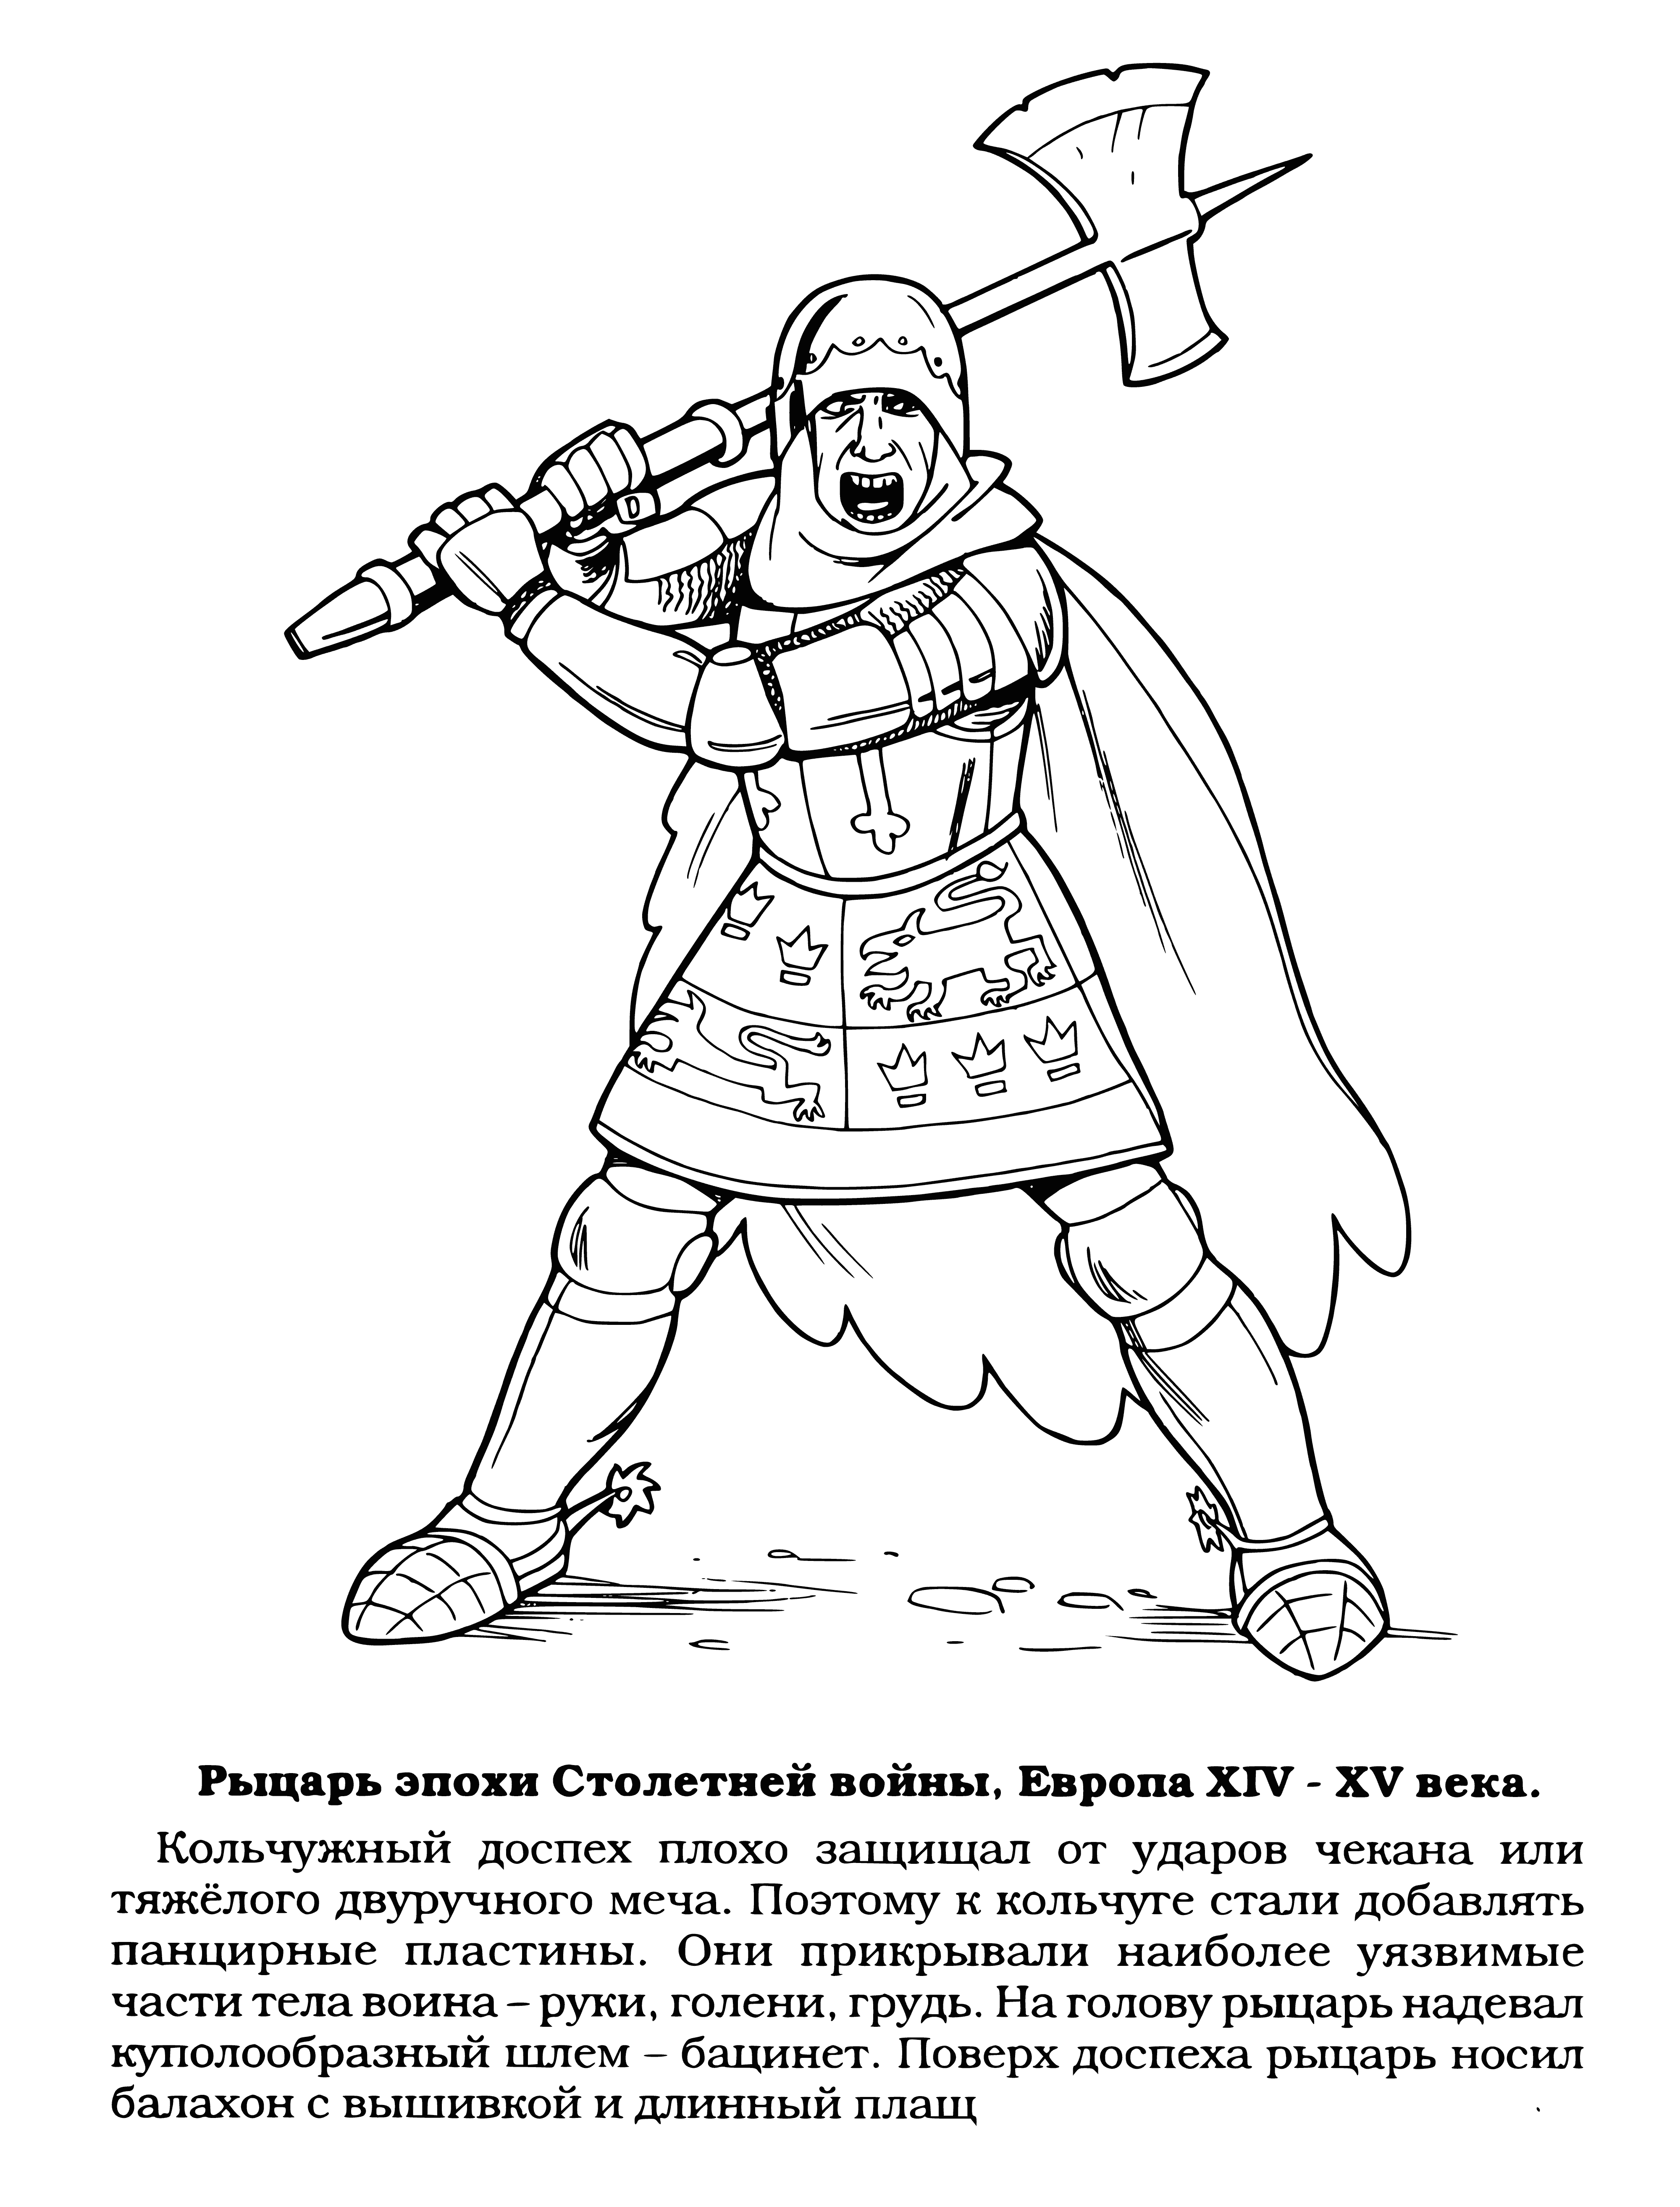 coloring page: A heavily armored knight stands ready for battle, battle ax in hand - battered armor emblazoned with a powerful crest. Helmet & shield complete a formidable warrior.